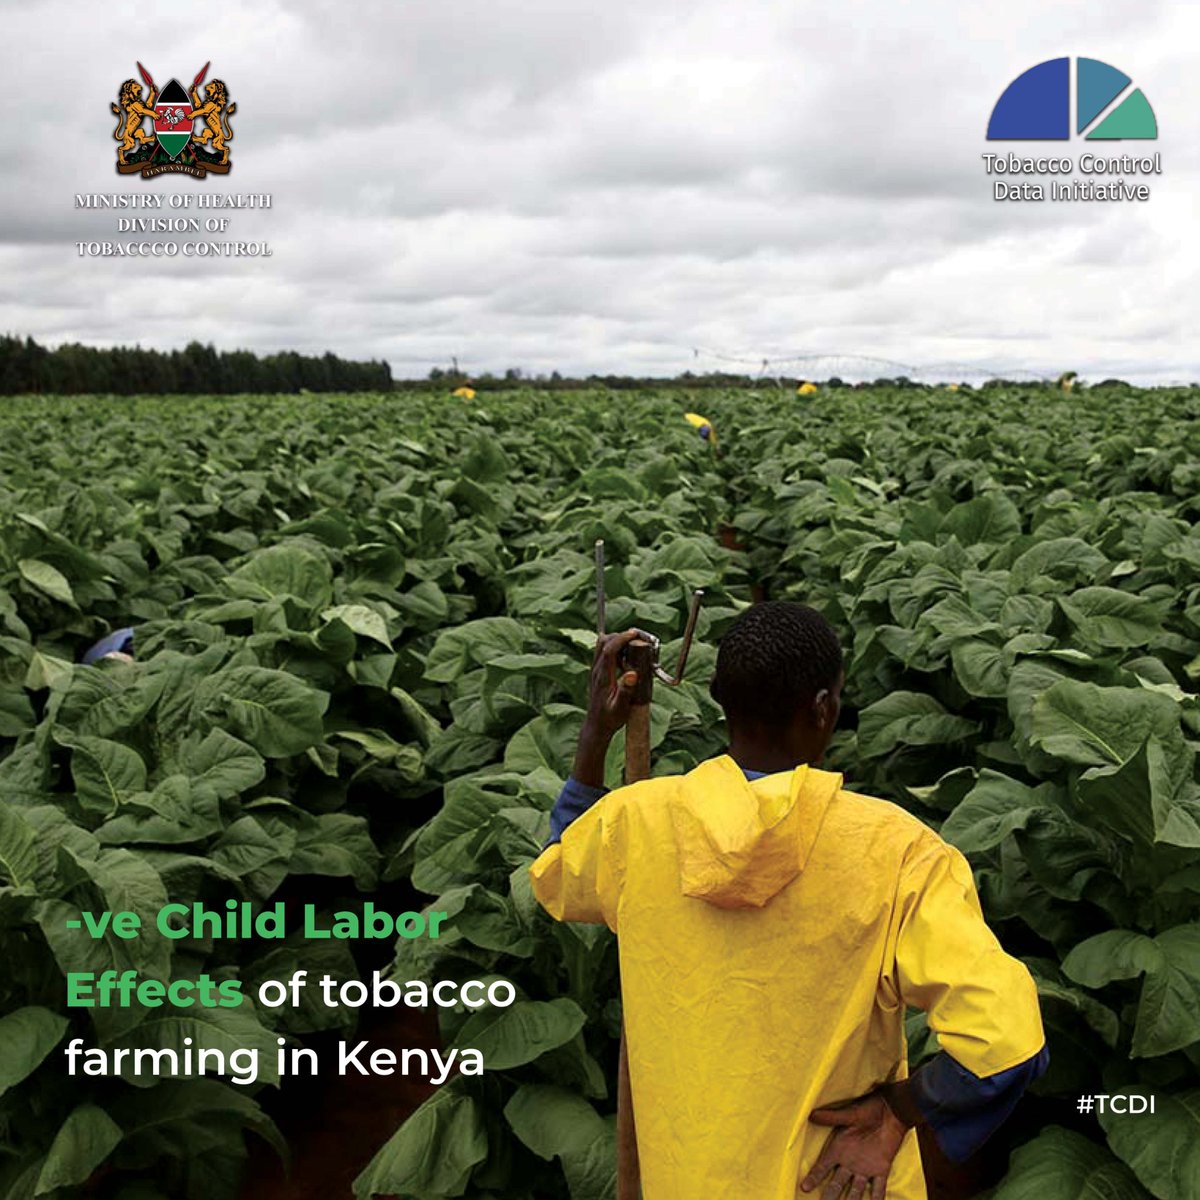 Heartbreaking💔

Children as young as 10 years old are toiling in tobacco farms, exposed to dangerous conditions & deprived of education.

Need reliable information on #TobaccoControl in Kenya? Stay informed on #TobaccoControlData through the #TCDI platform.

#TobaccoFreeFarmsKE